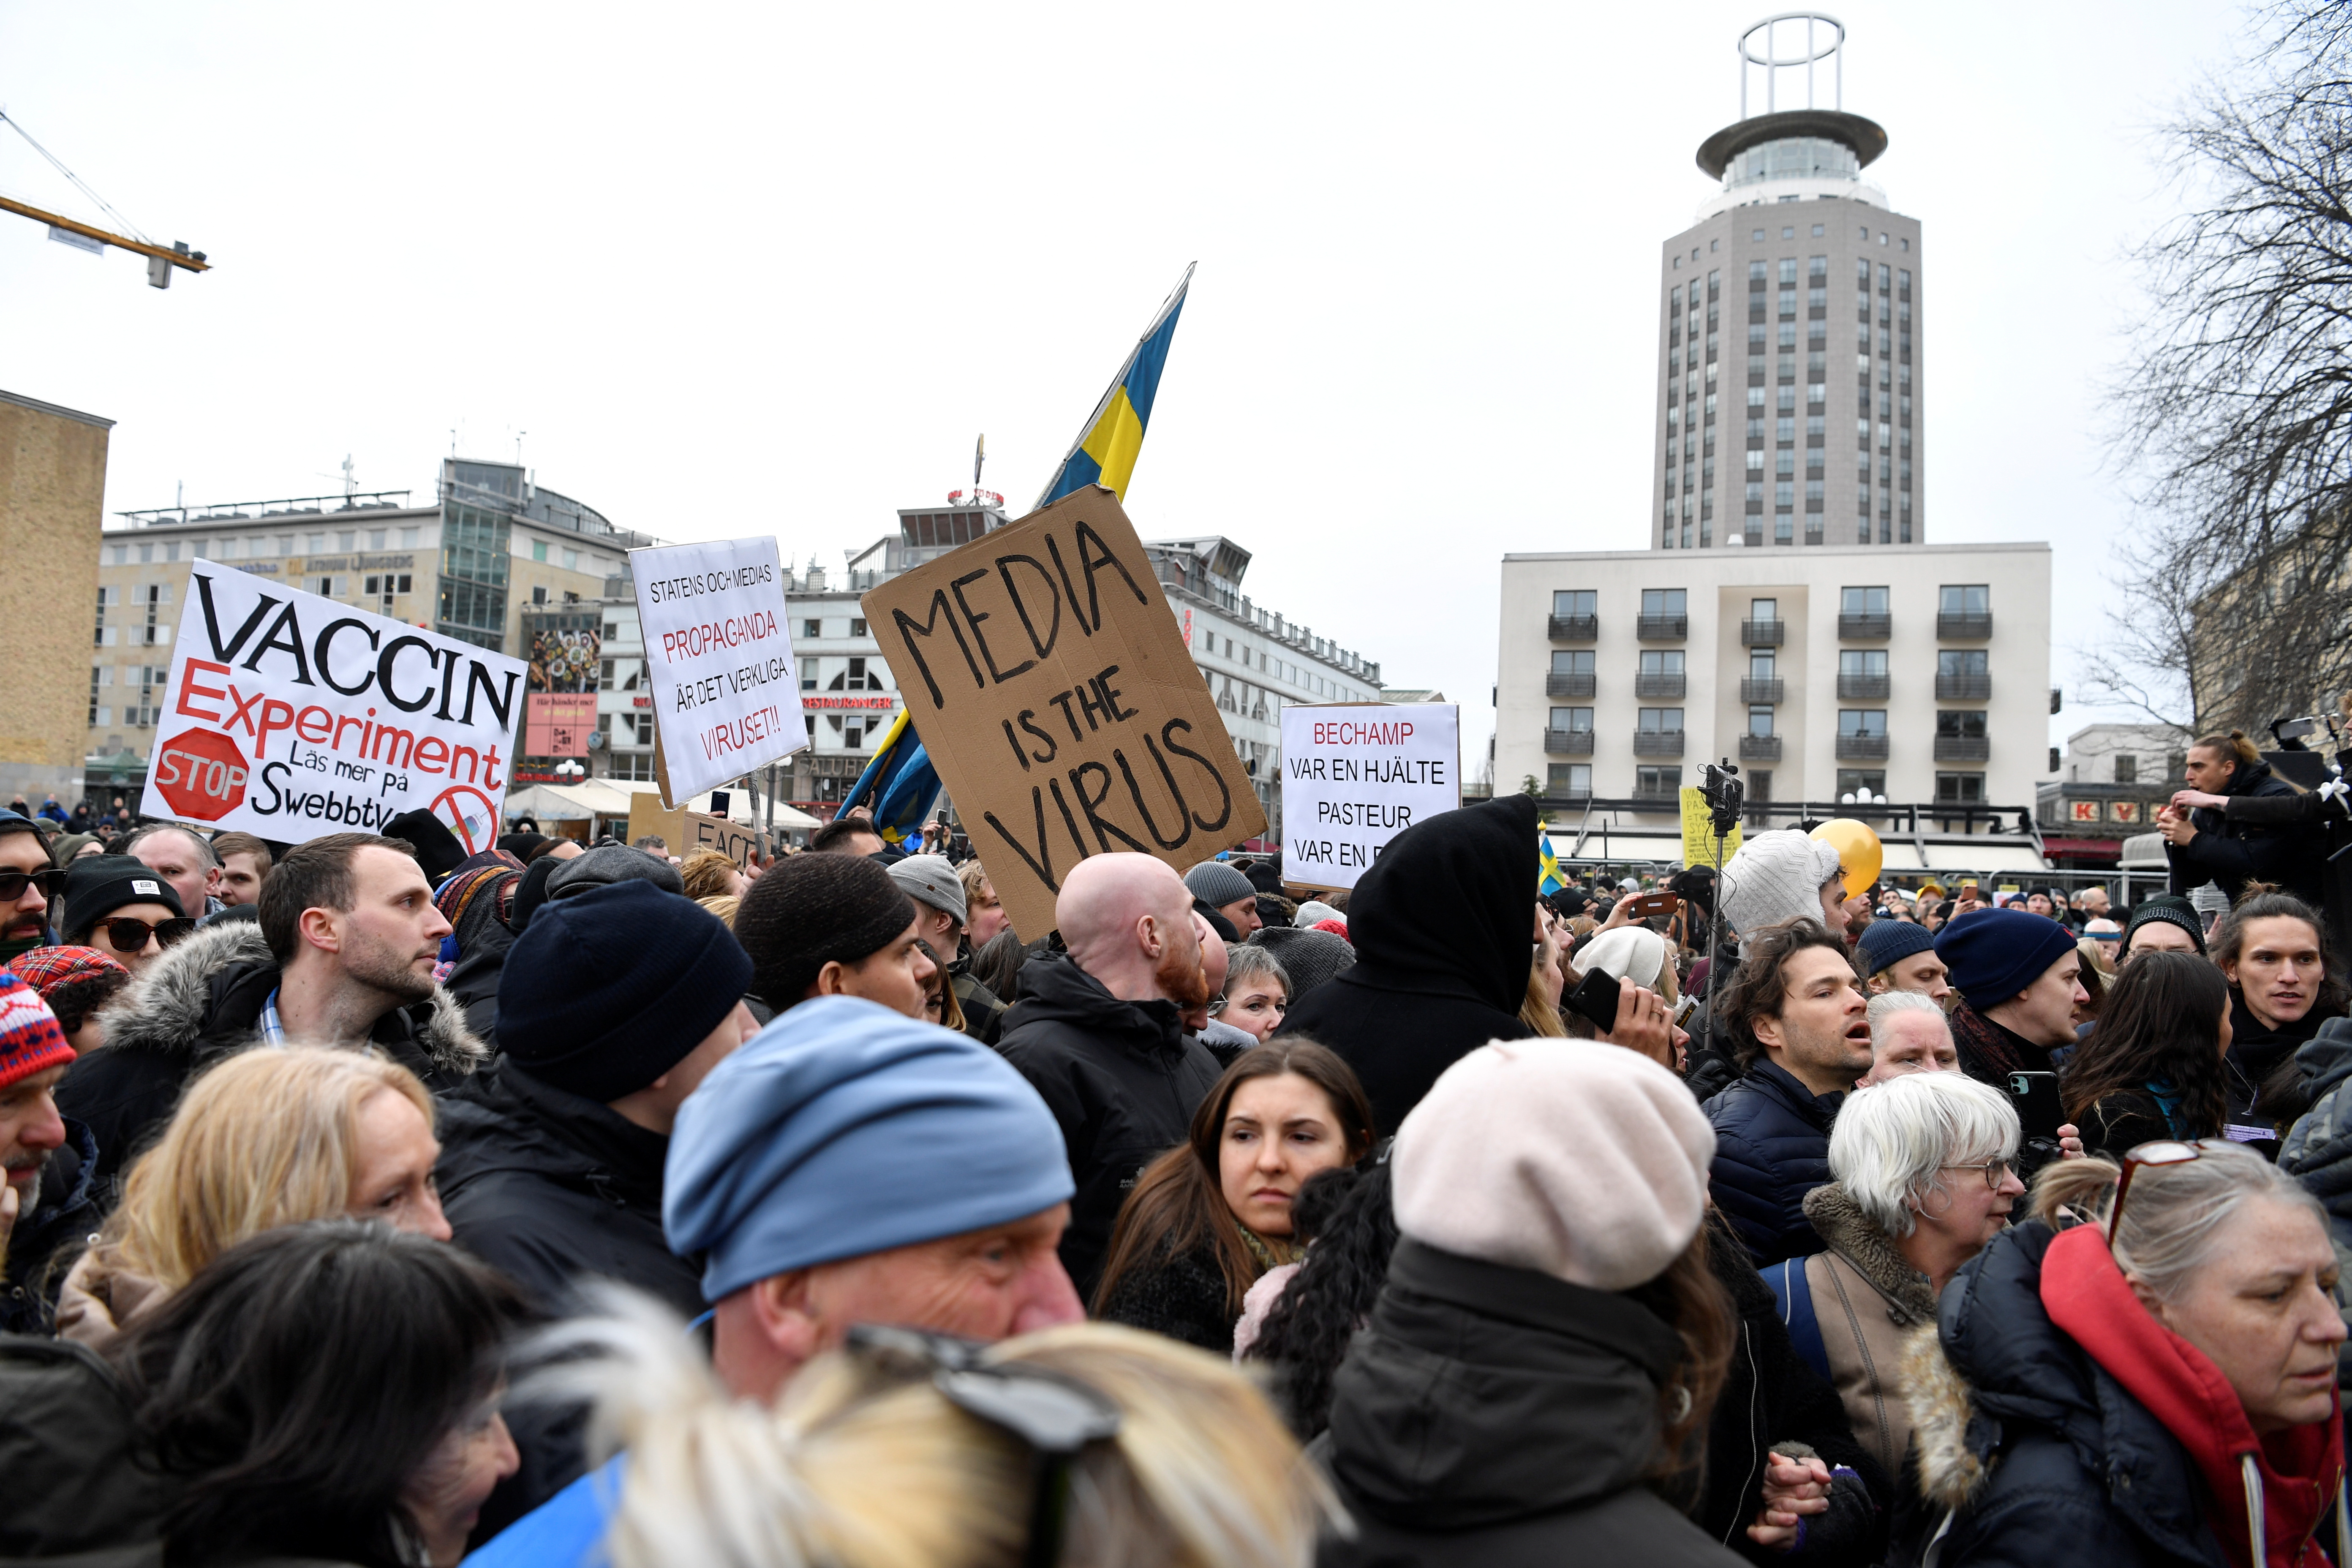 Protest in defiance of a ban on large gatherings, in Stockholm